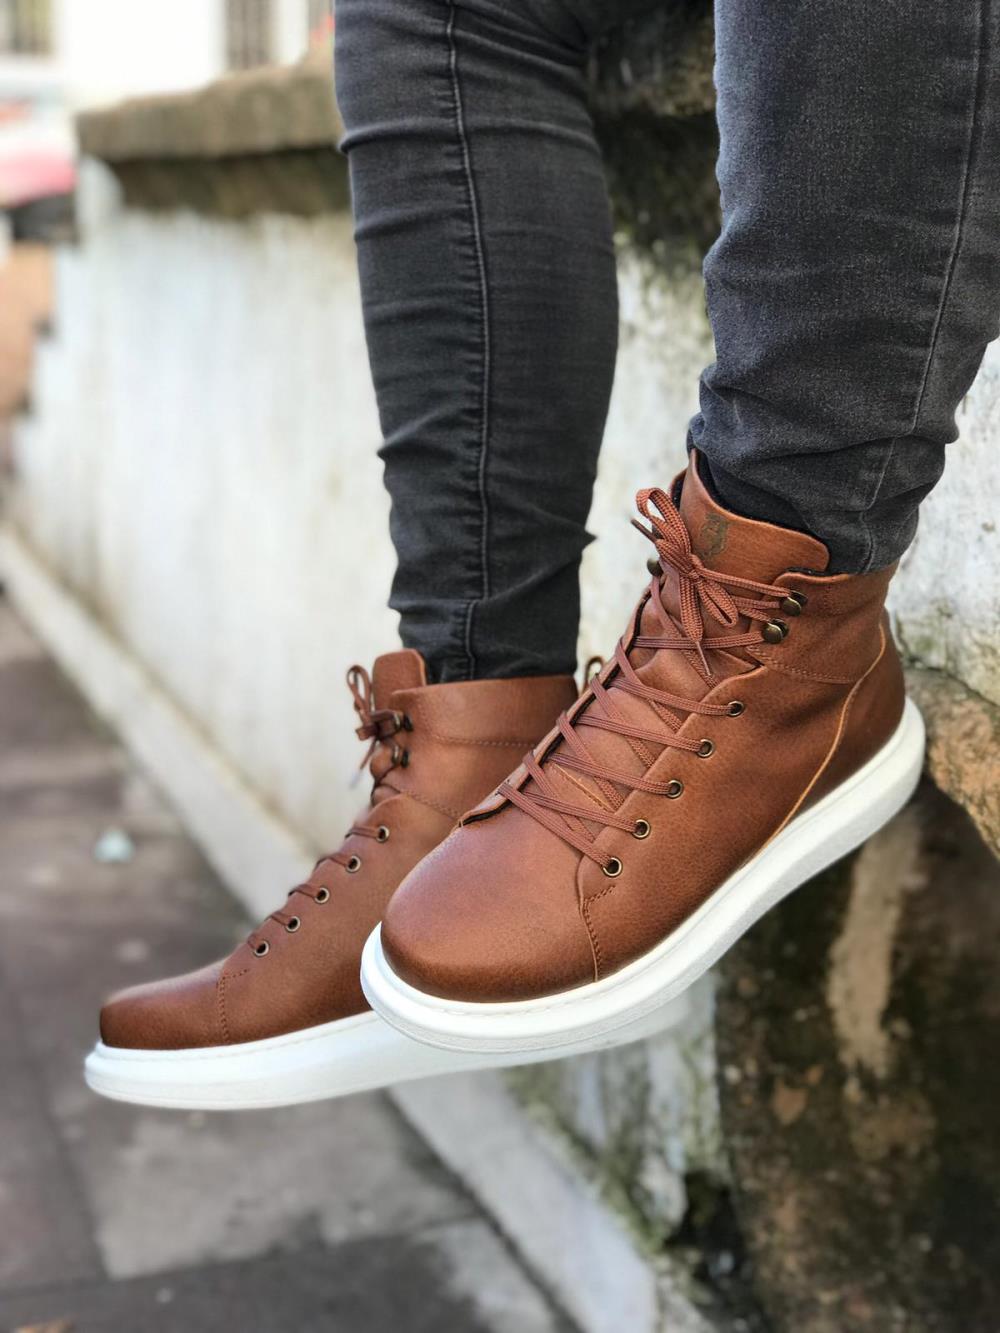 Men's High Sole Shoes B-080 Brown - STREETMODE ™